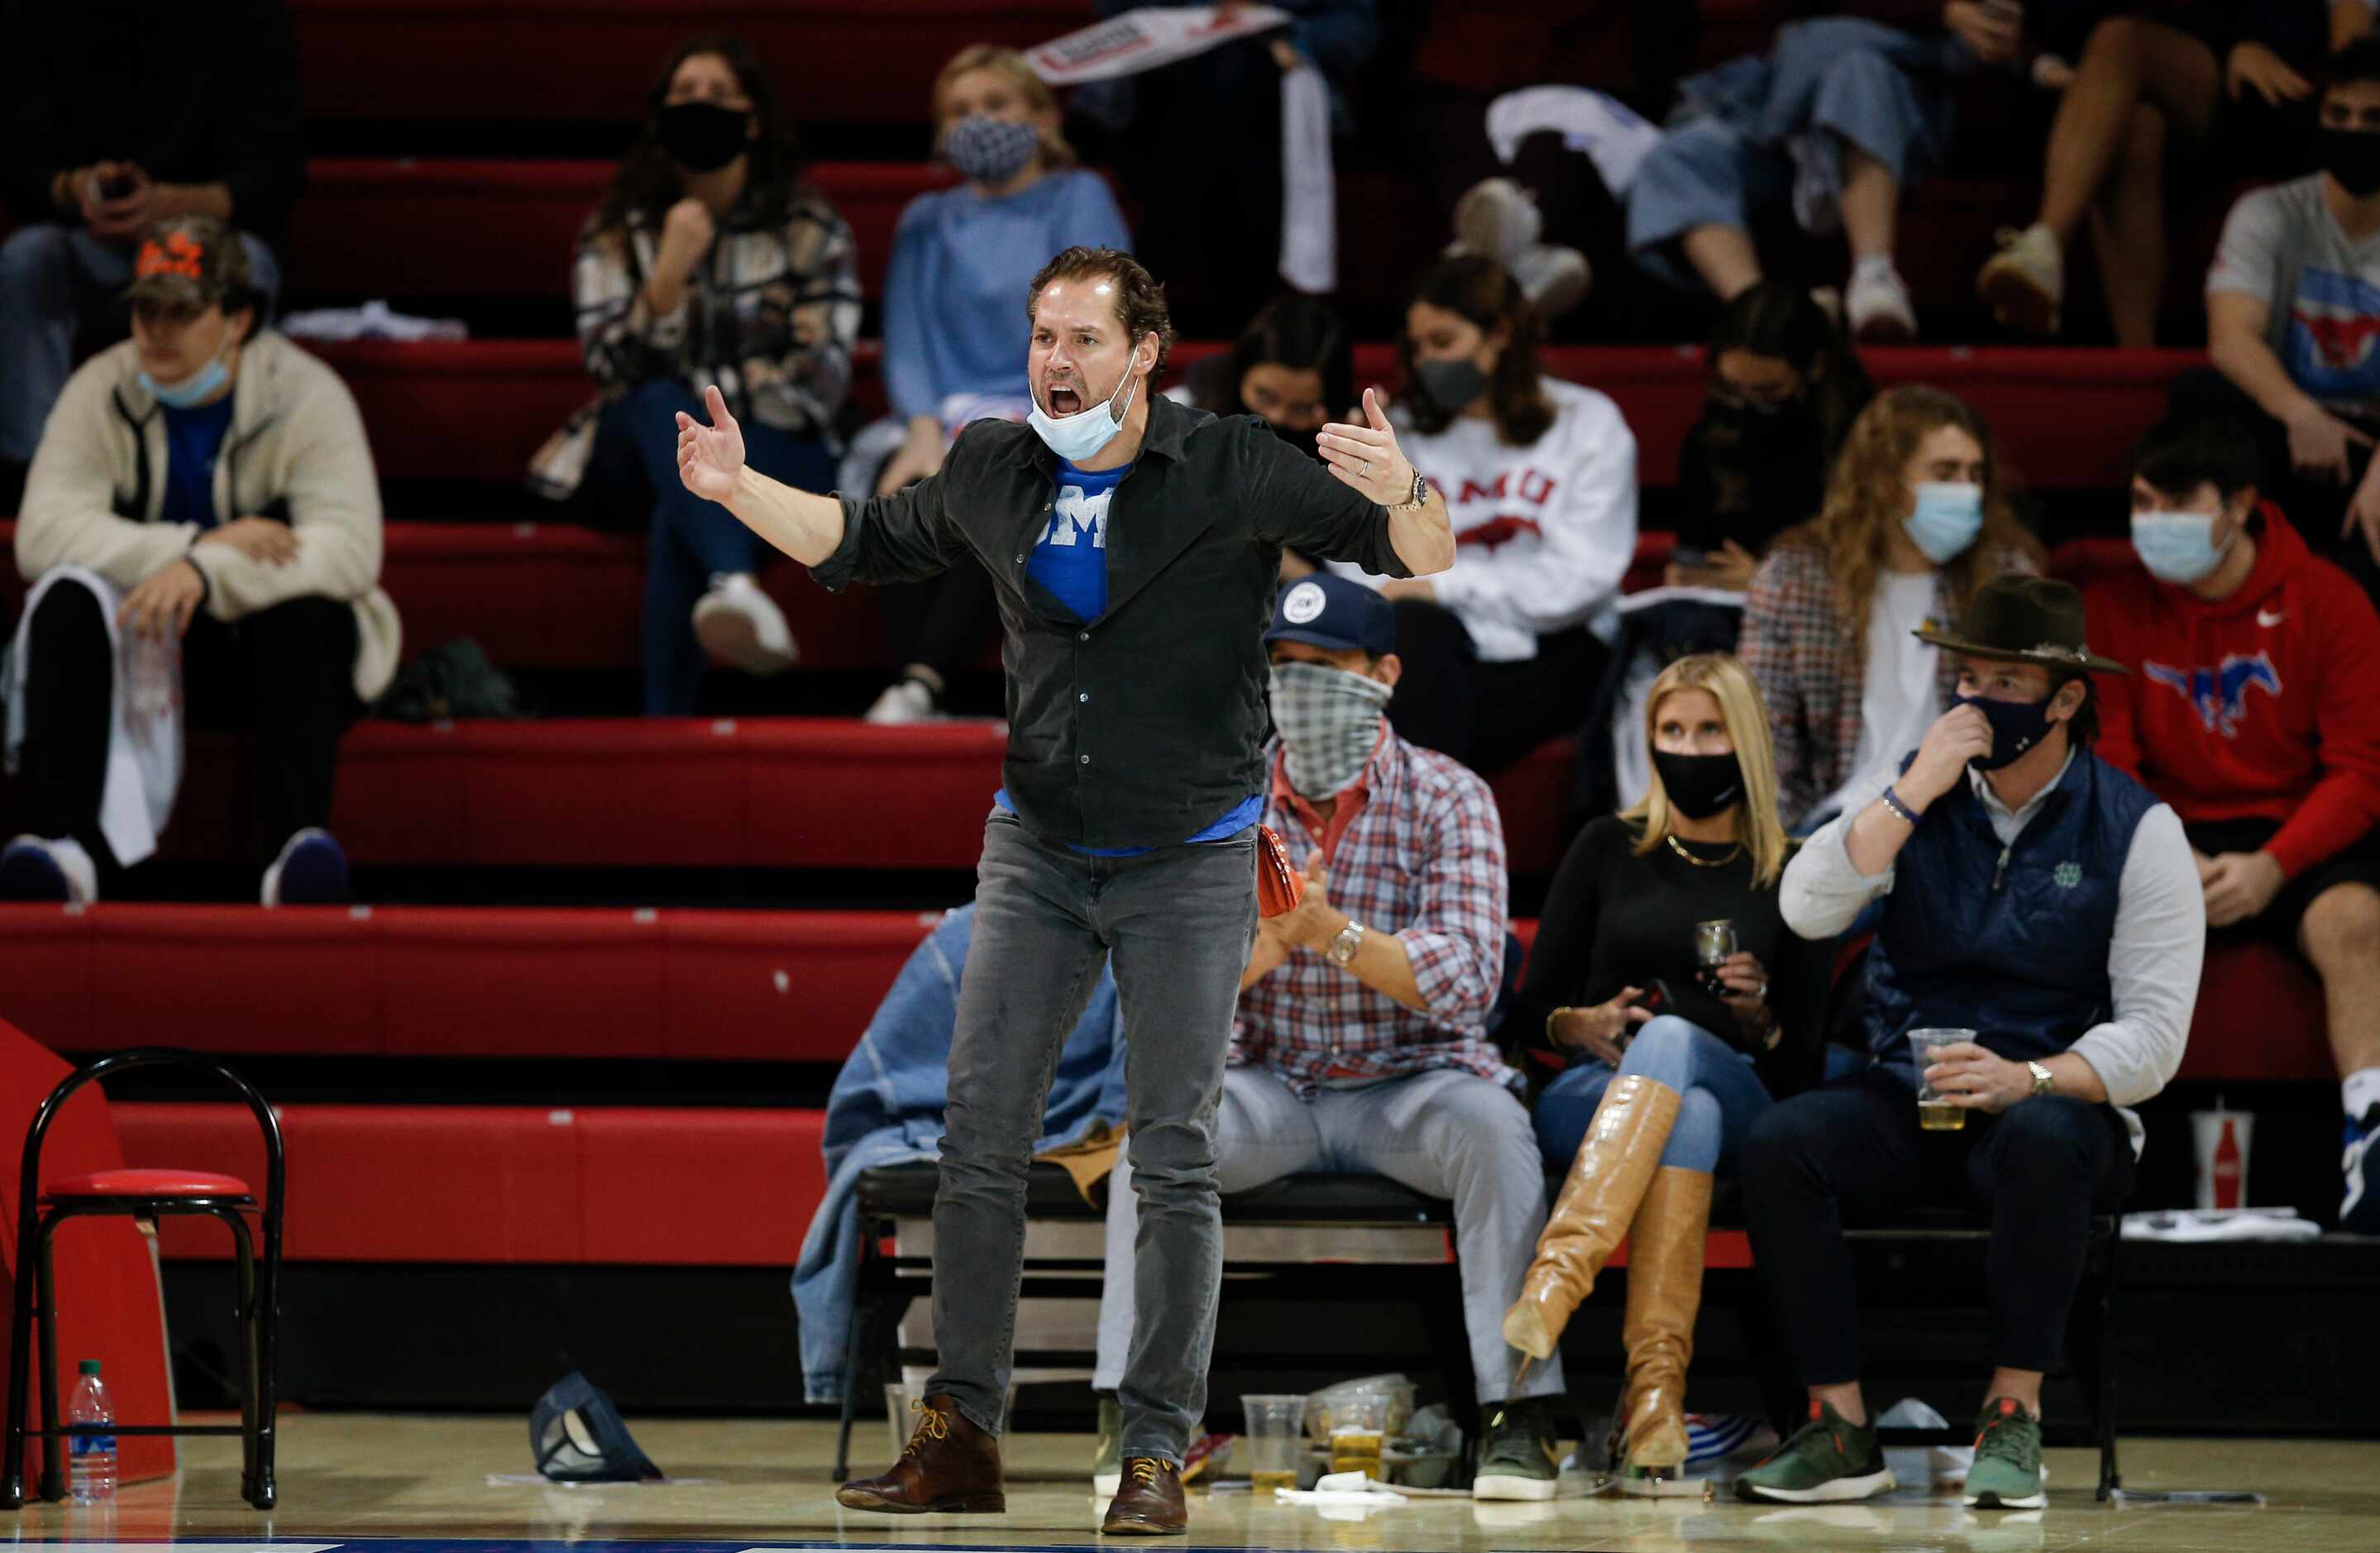 An SMU fan cheers on the team during the second half of a college basketball game against...